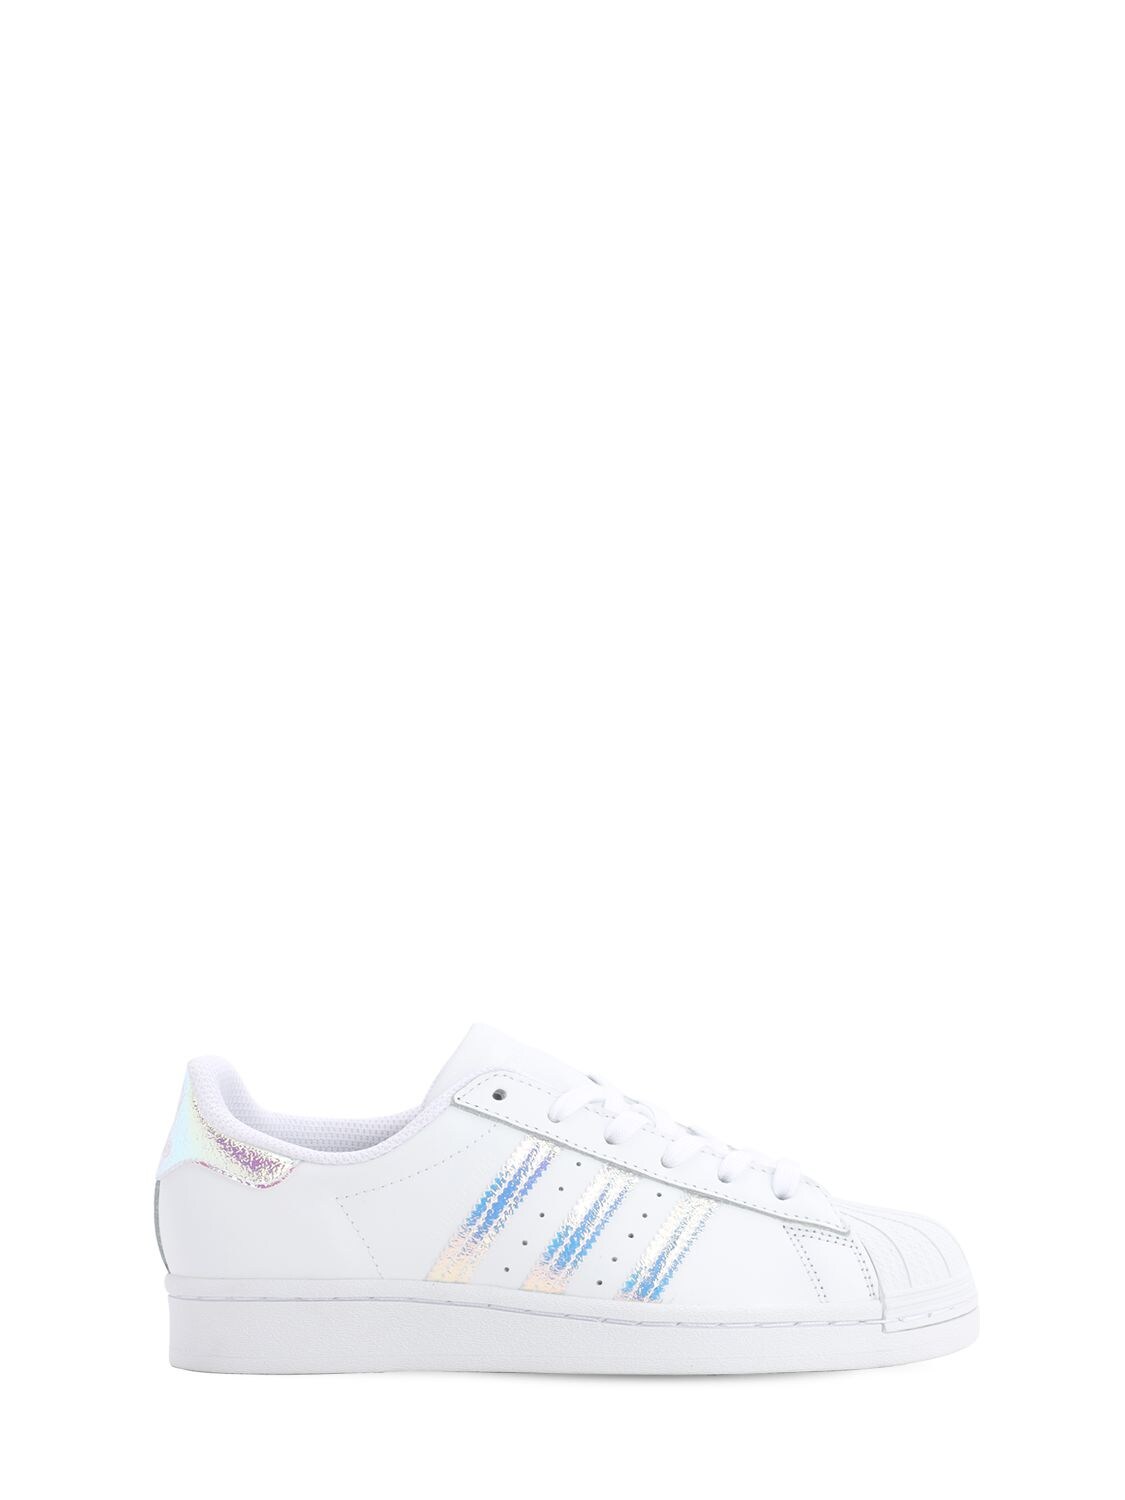 Adidas Originals Kids' Superstar Leather Sneakers In White